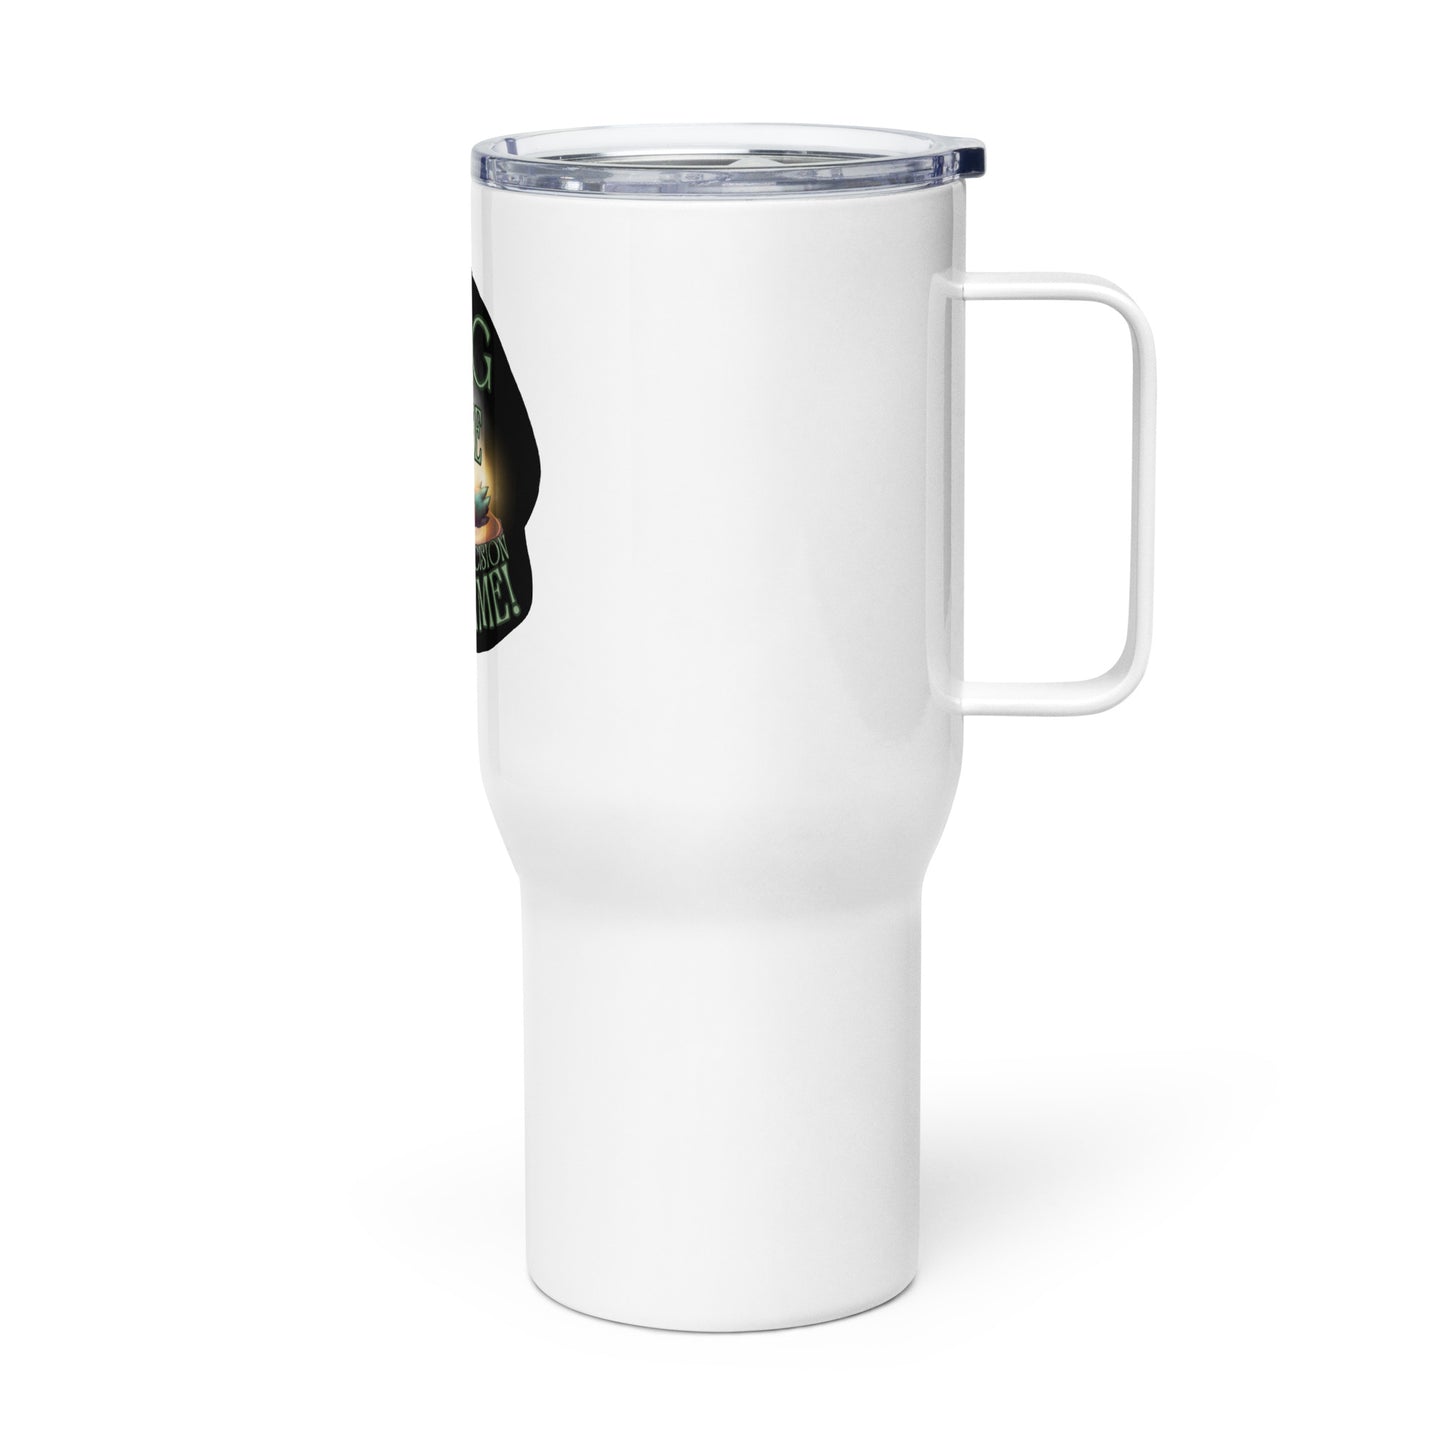 Saging Life One Bad Decision At A Time Travel mug with a handle